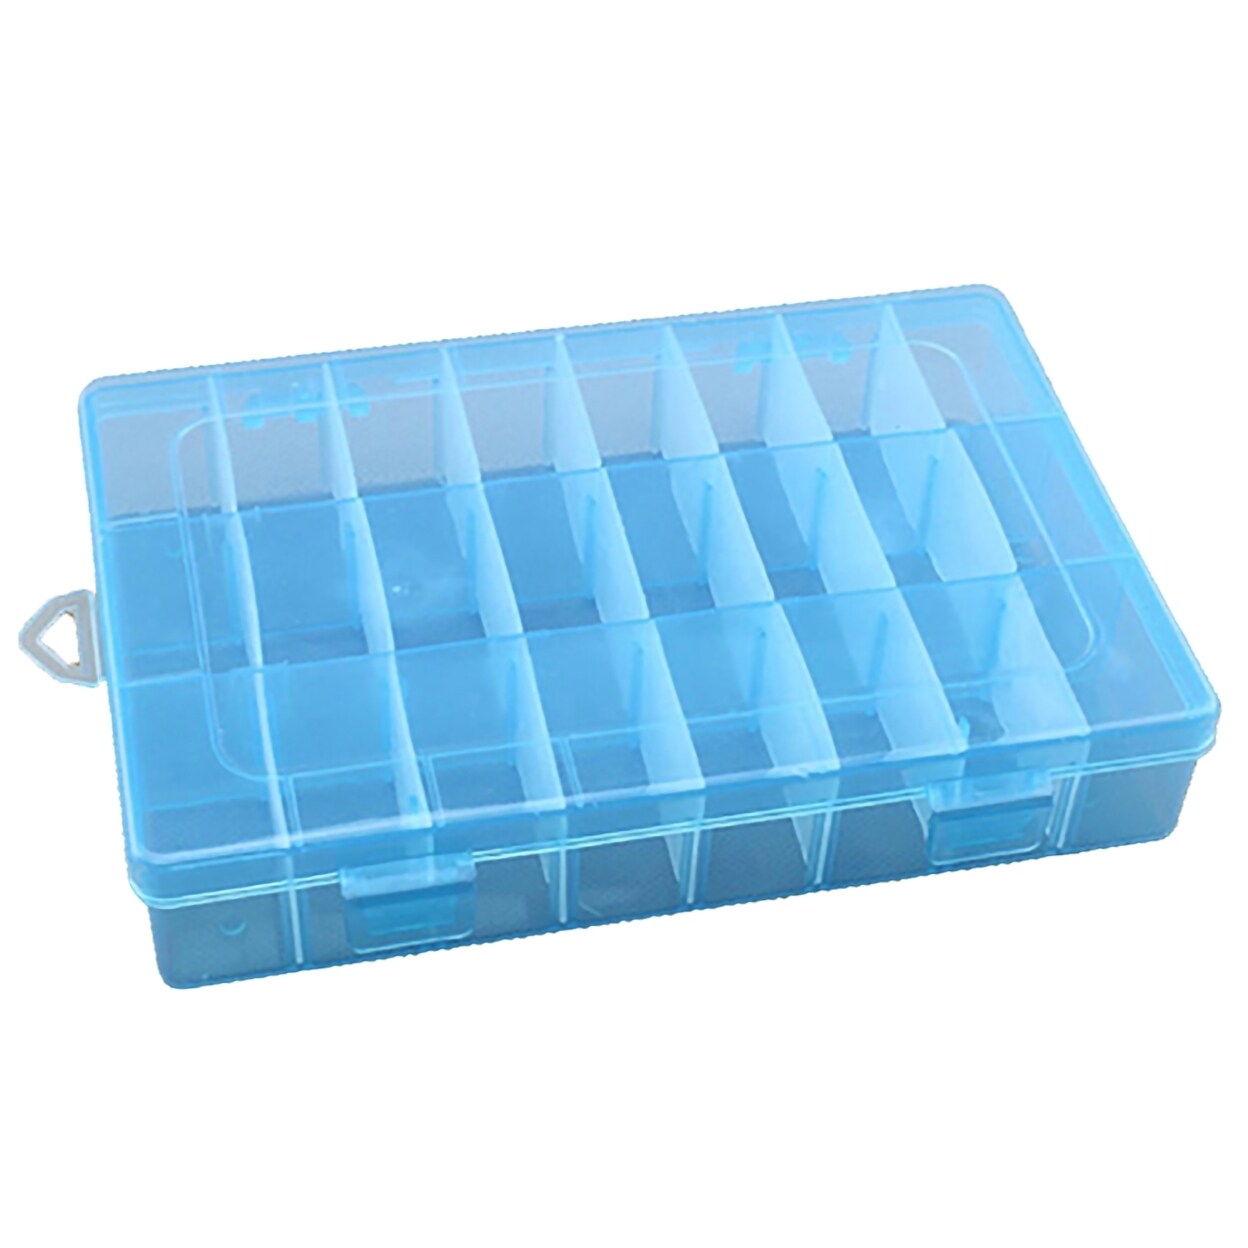 Generic Storage Box Large Capacity Transparent PP Home 24 Grids Dividers Box for Crafts